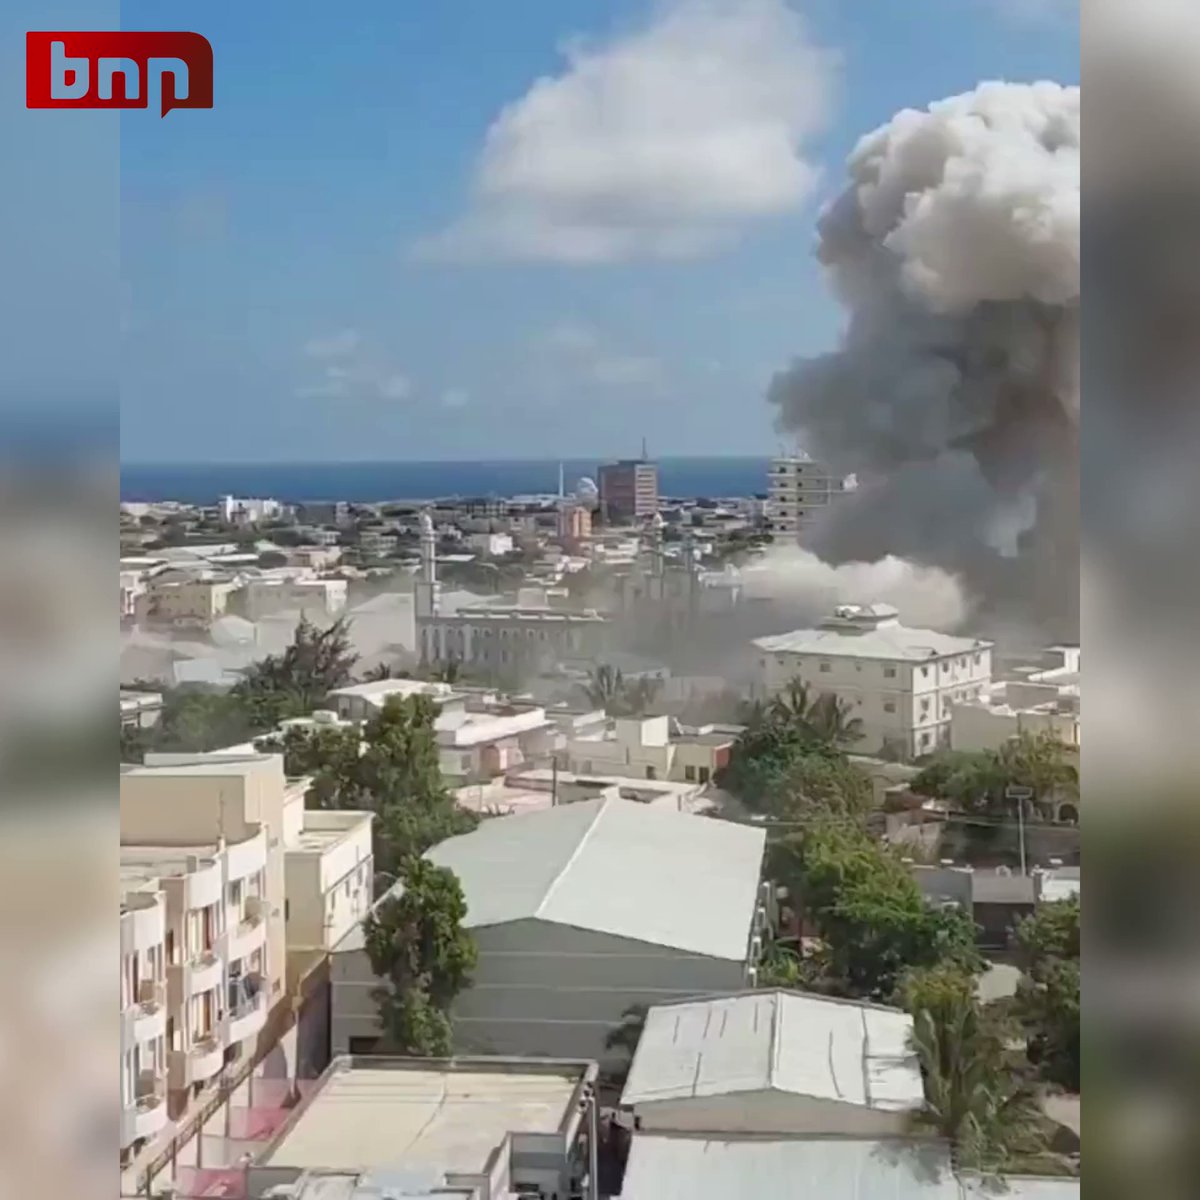 On Saturday, two car bomb explosions targeting the education ministry of Somalia shook the city of Mogadishu and shattered windows of neighboring structures, according to witnesses